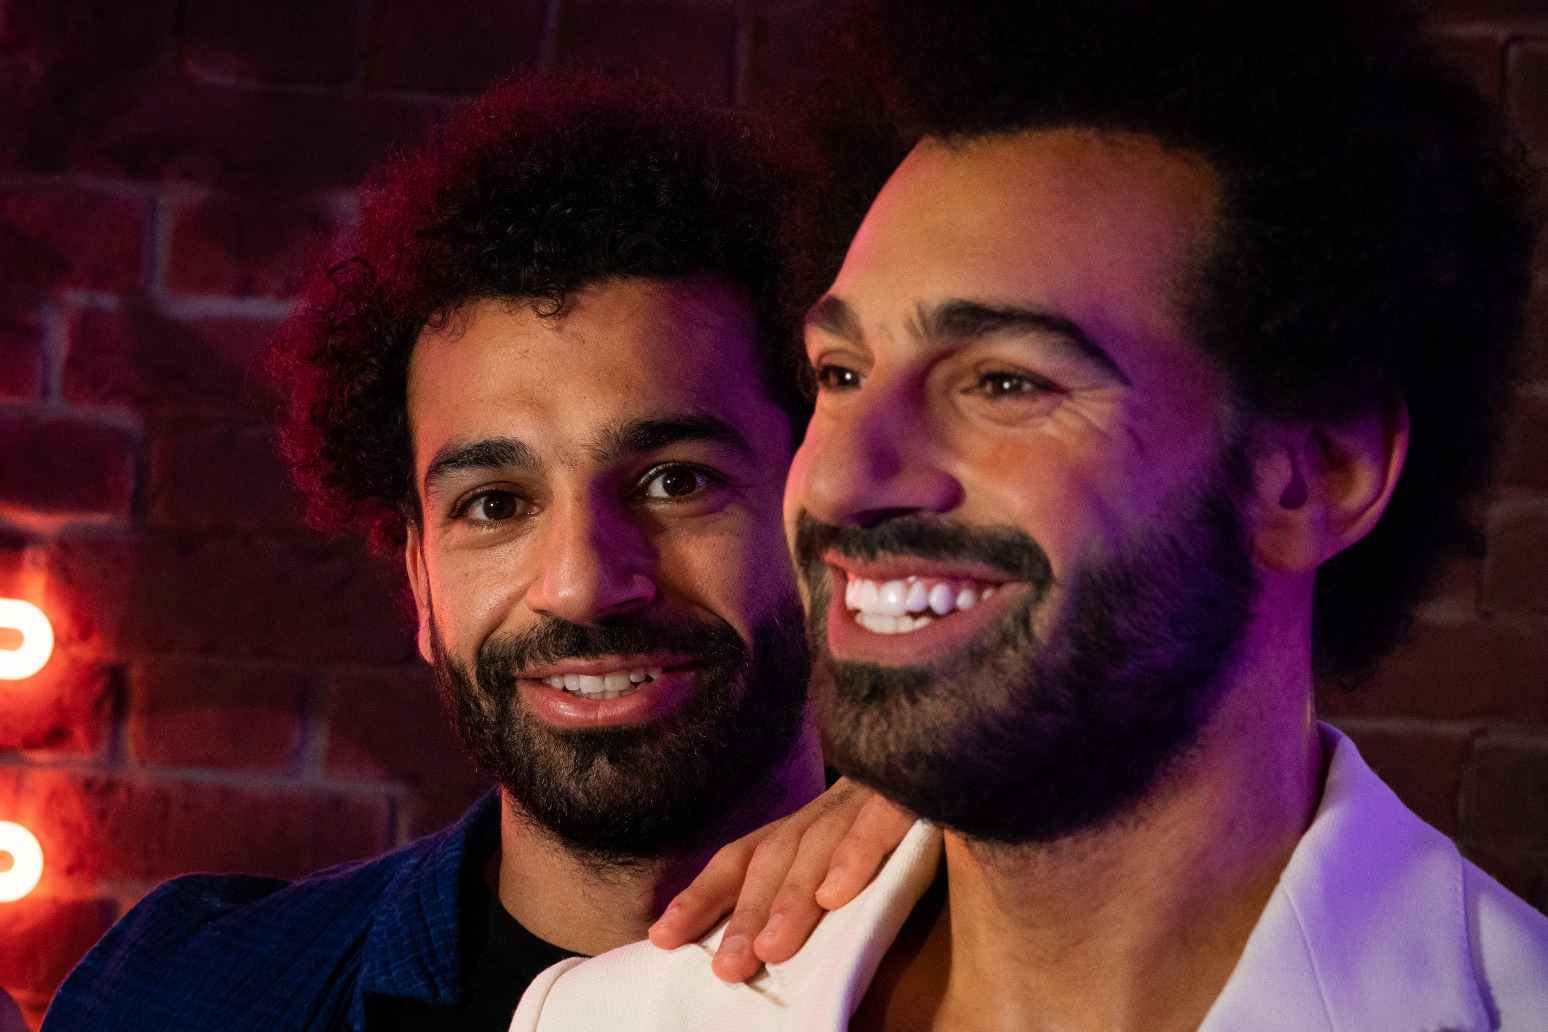 Mohamed Salah says Madame Tussauds waxwork is ‘a blessing’ 